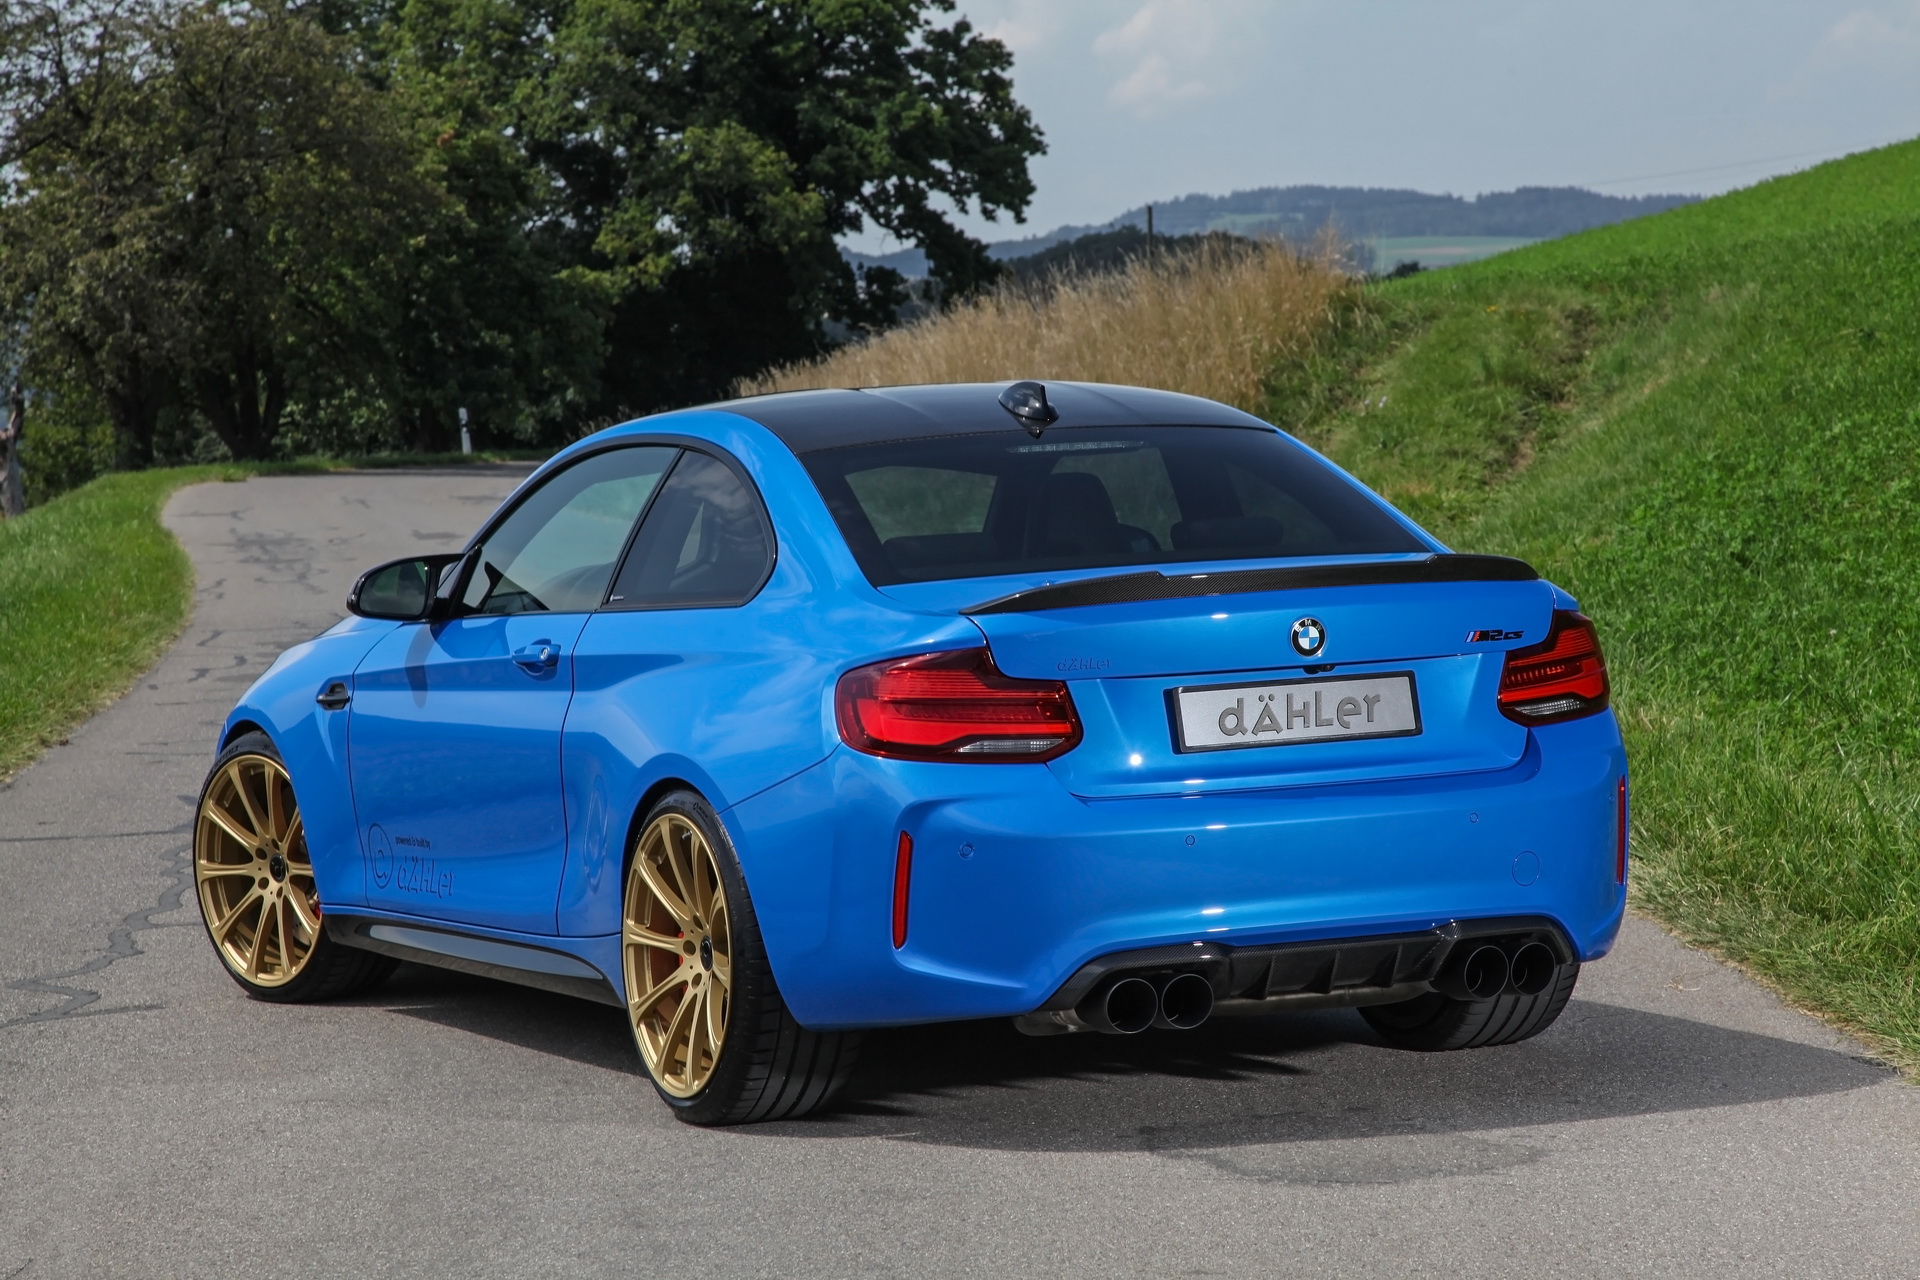 Dahler S Bmw M2 Cs Is More Powerful Than The Next M3 And M4 Usa News Hub